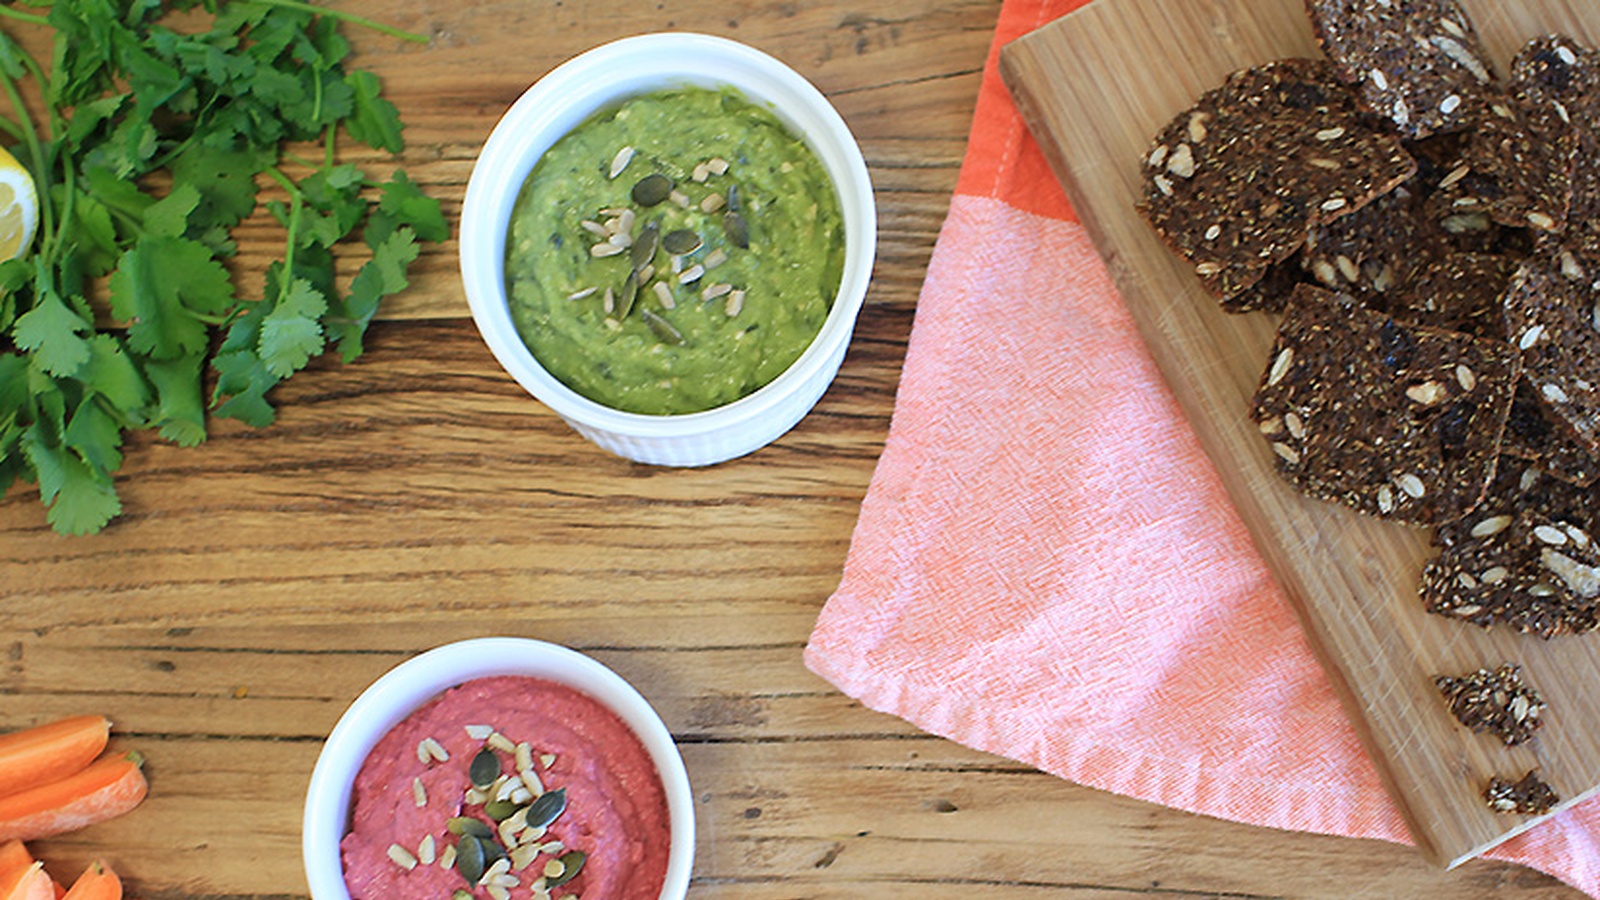 Nut & Seed Crackers With Dips (Recipe)